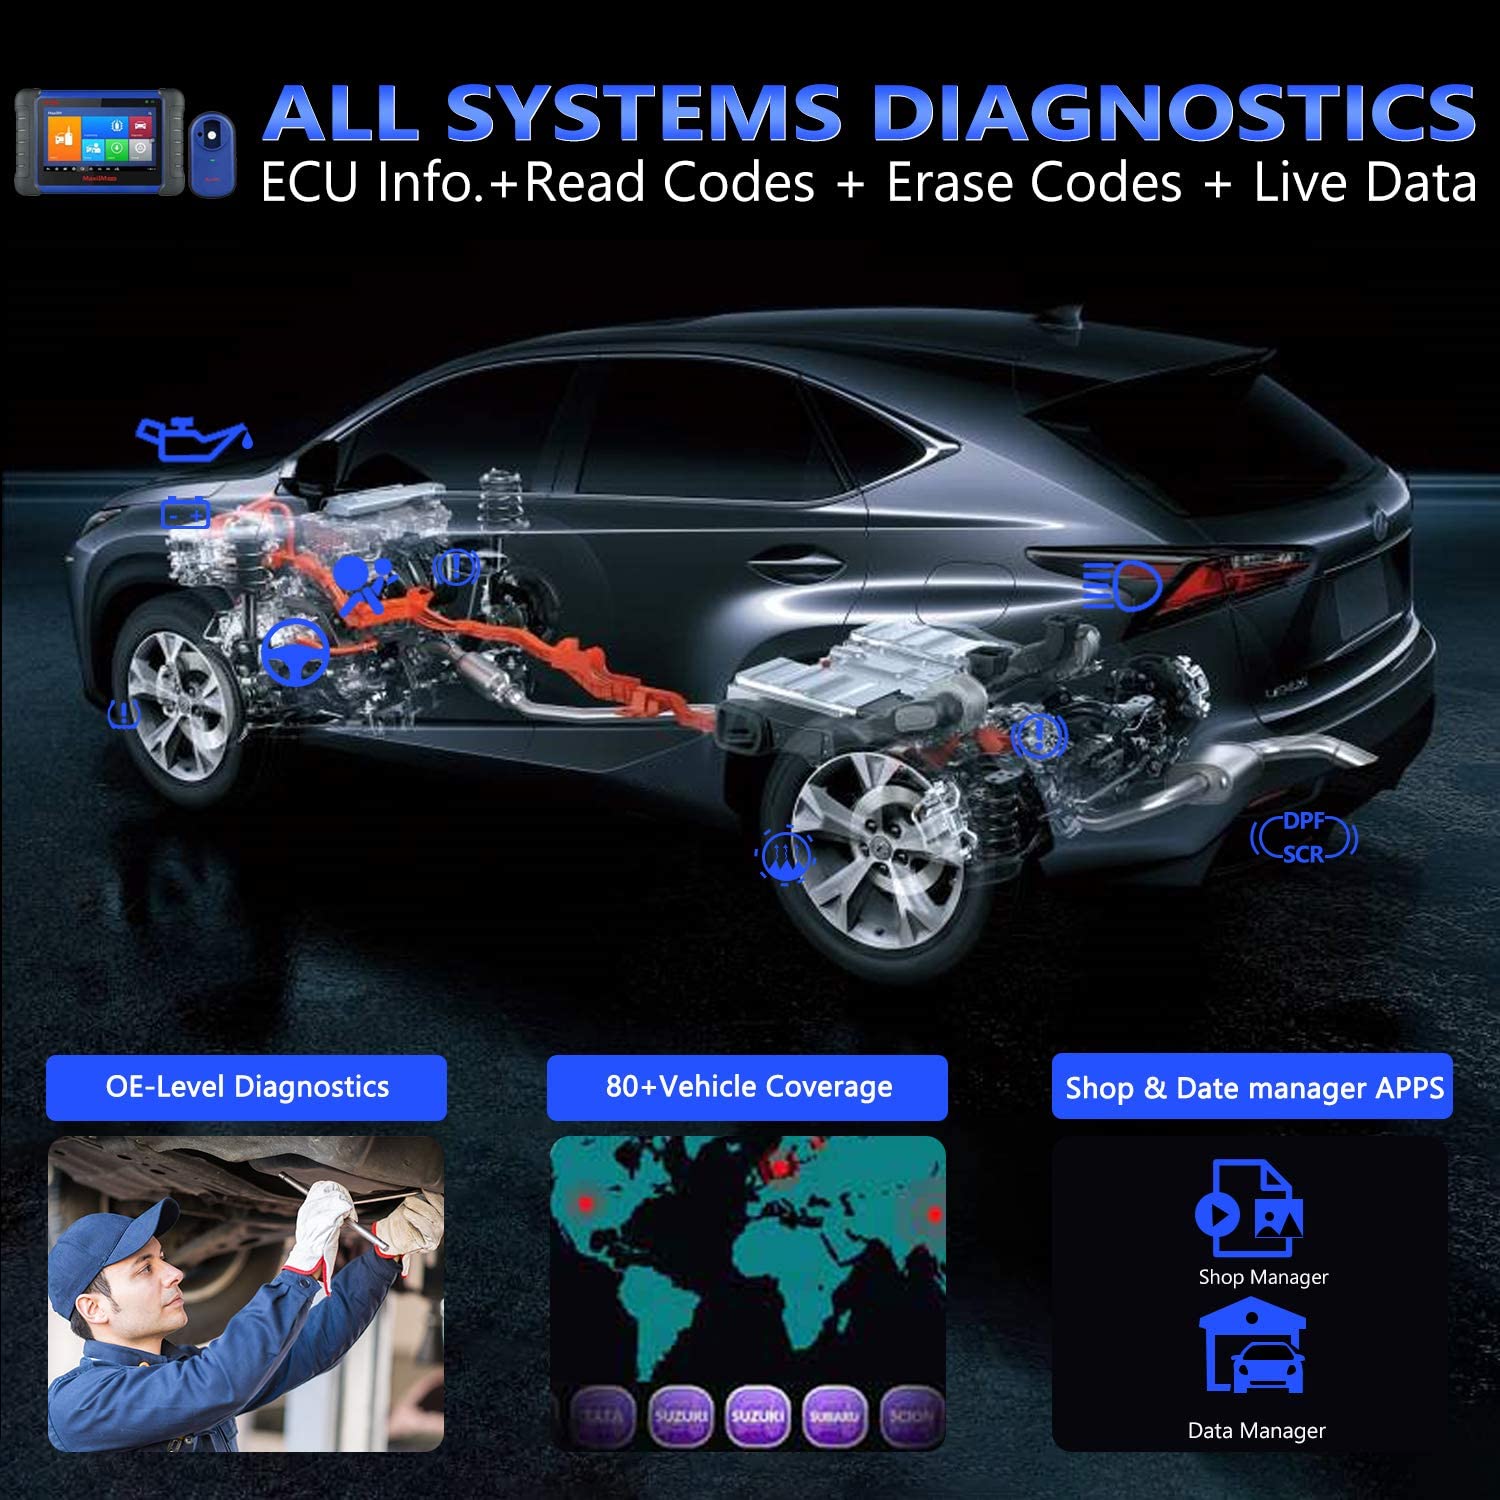 Autel im508 is all system diagnostic tool